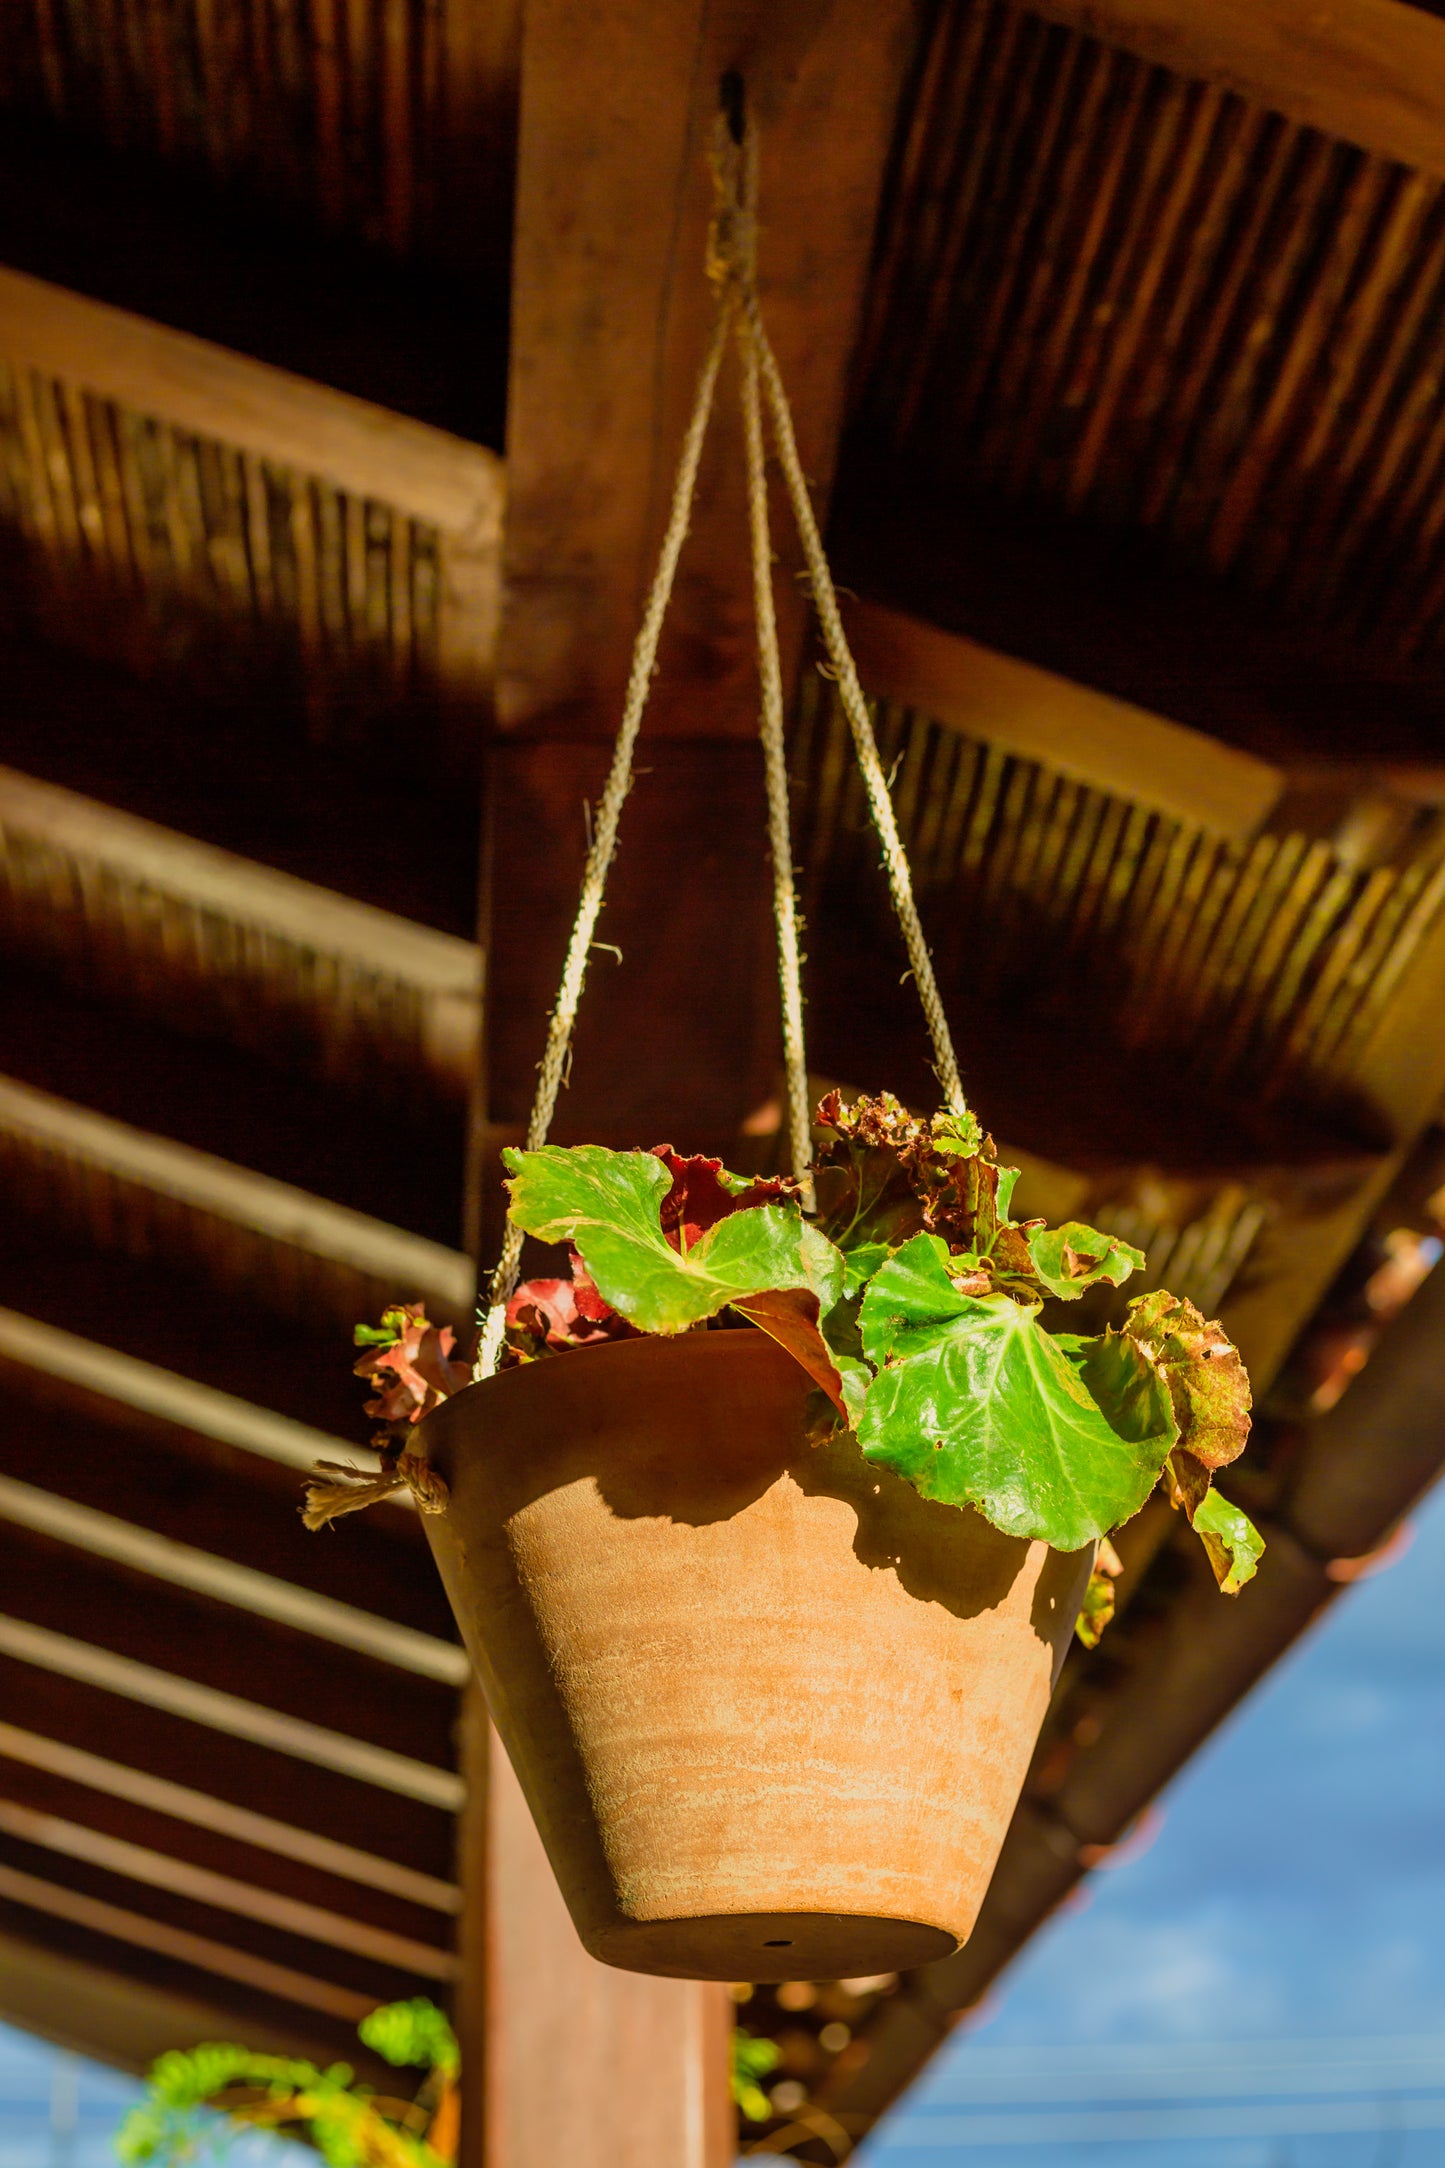 Concrete-washed Terracotta Hanging Planter